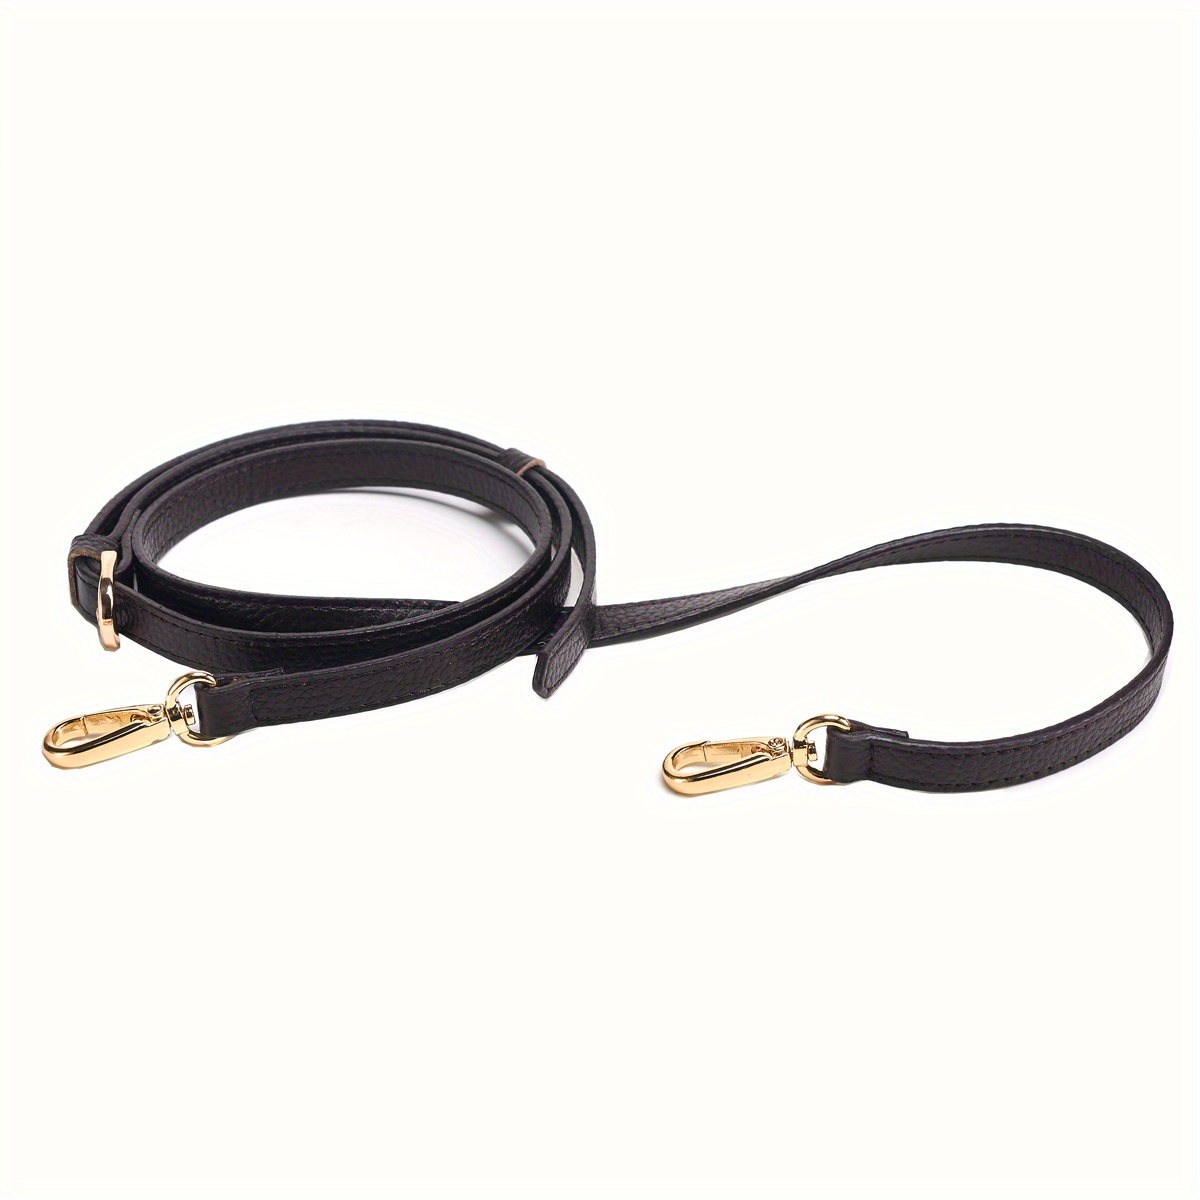 1 Pc Black Genuine Leather Strap Belt Dark Gold Chain Replacement Real  Leather Bag Purse Strap Cross Body Replace Strap YY 